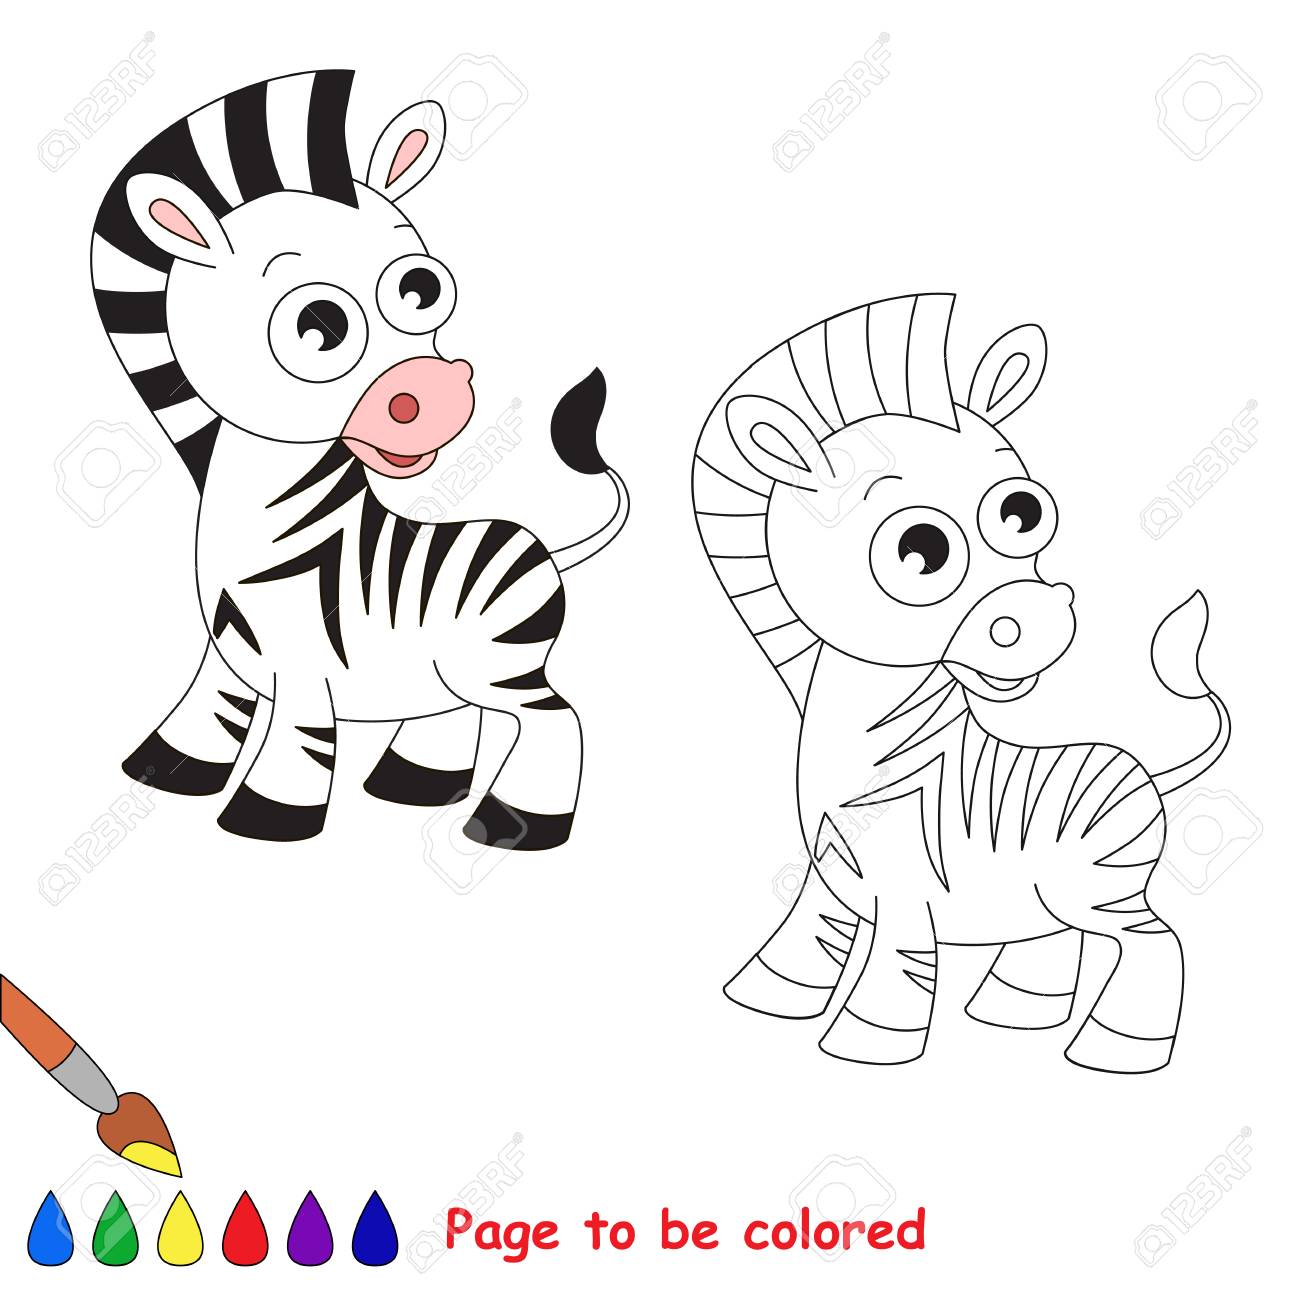 Funny zebra to be colored coloring book to educate kids learn colors visual educational game easy kid gaming and primary education simple level of difficulty coloring pages royalty free svg cliparts vectors